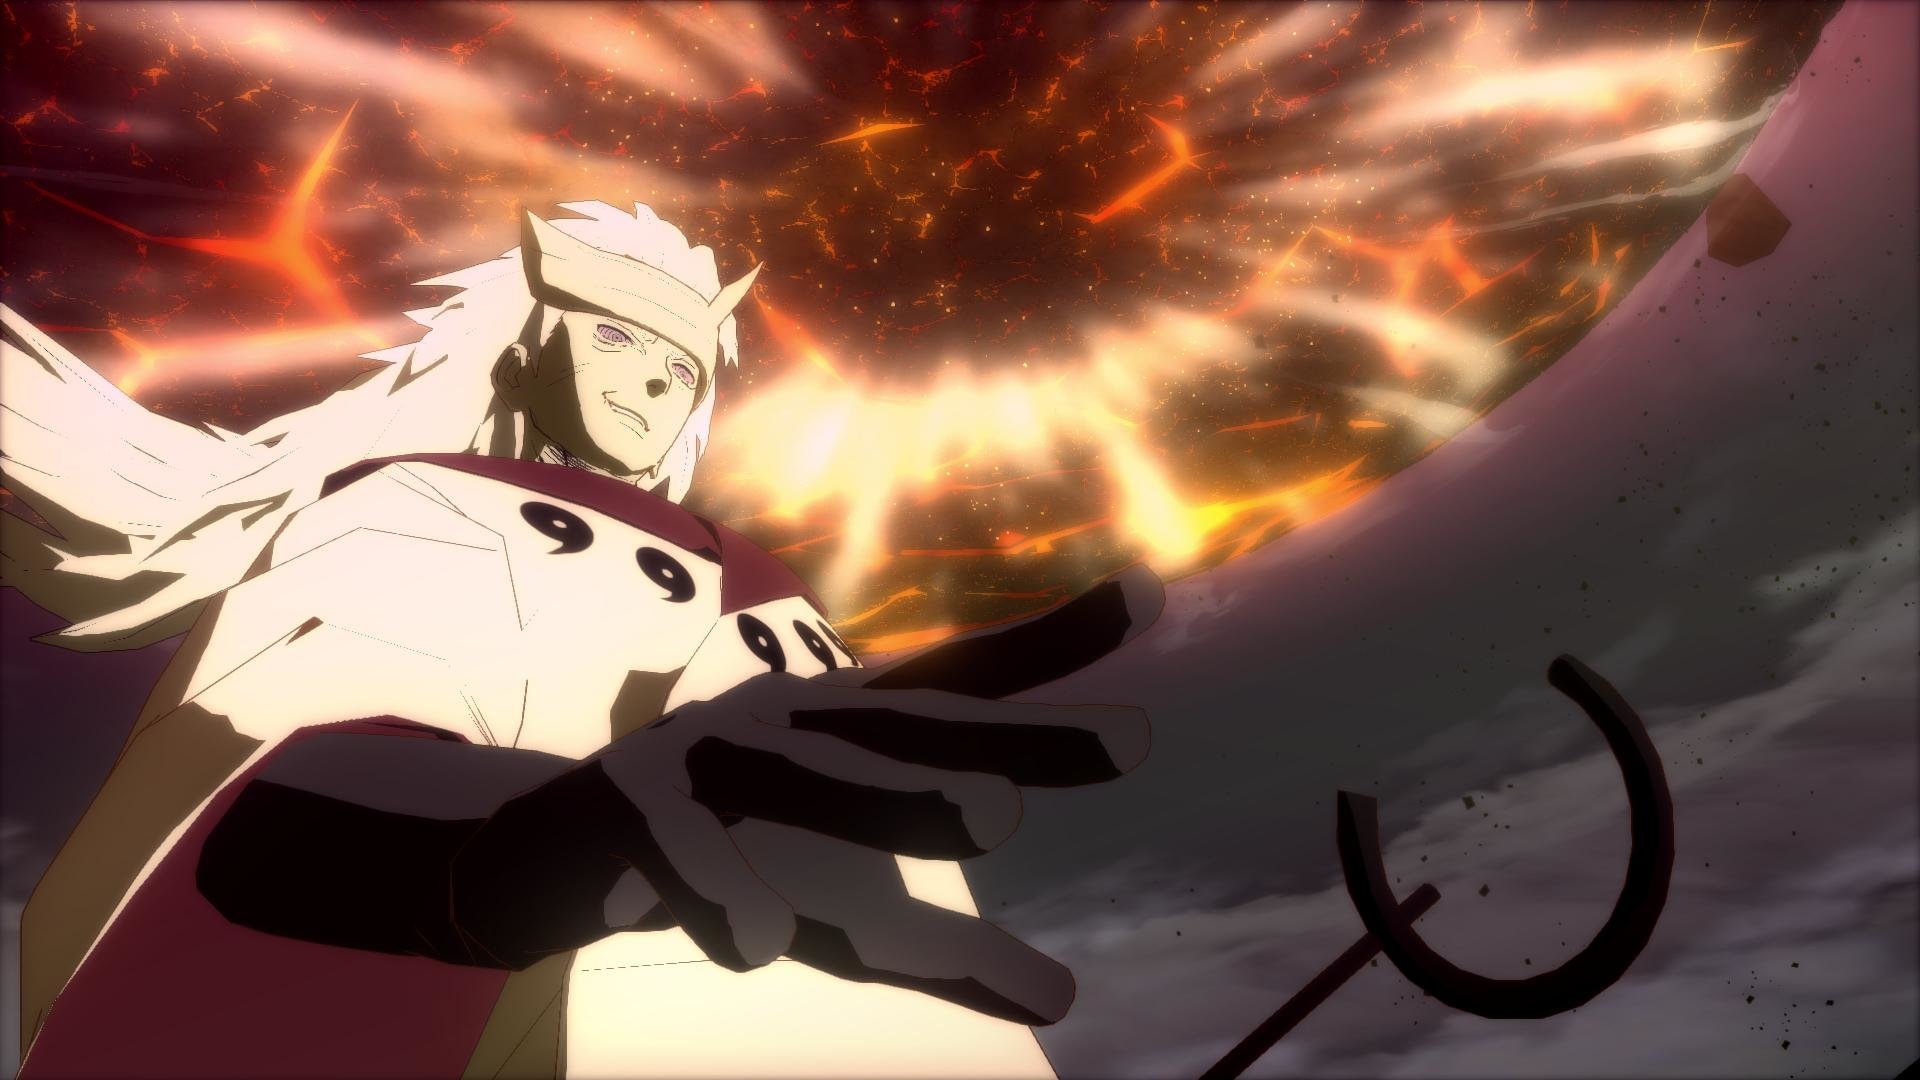 Awesome Naruto Shippuden: Ultimate Ninja Storm 4 free background ID:408871 for full hd 1080p desktop